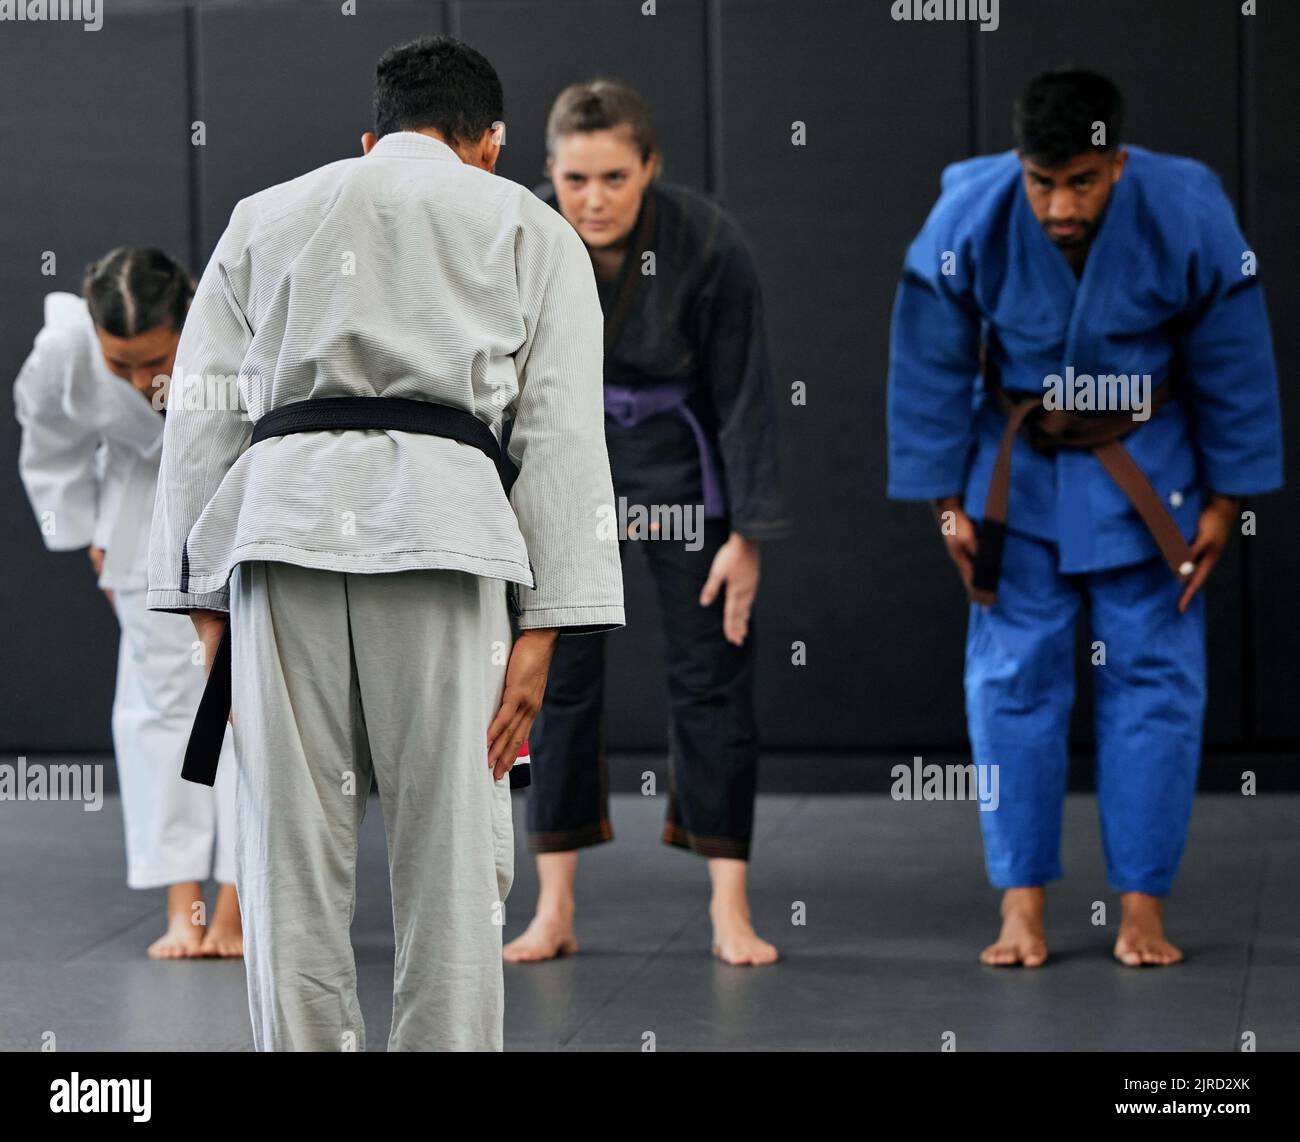 Fitness, strength and respect between karate trainer leading a class, bow and greeting martial arts student at a dojo or studio. Diverse group Stock Photo